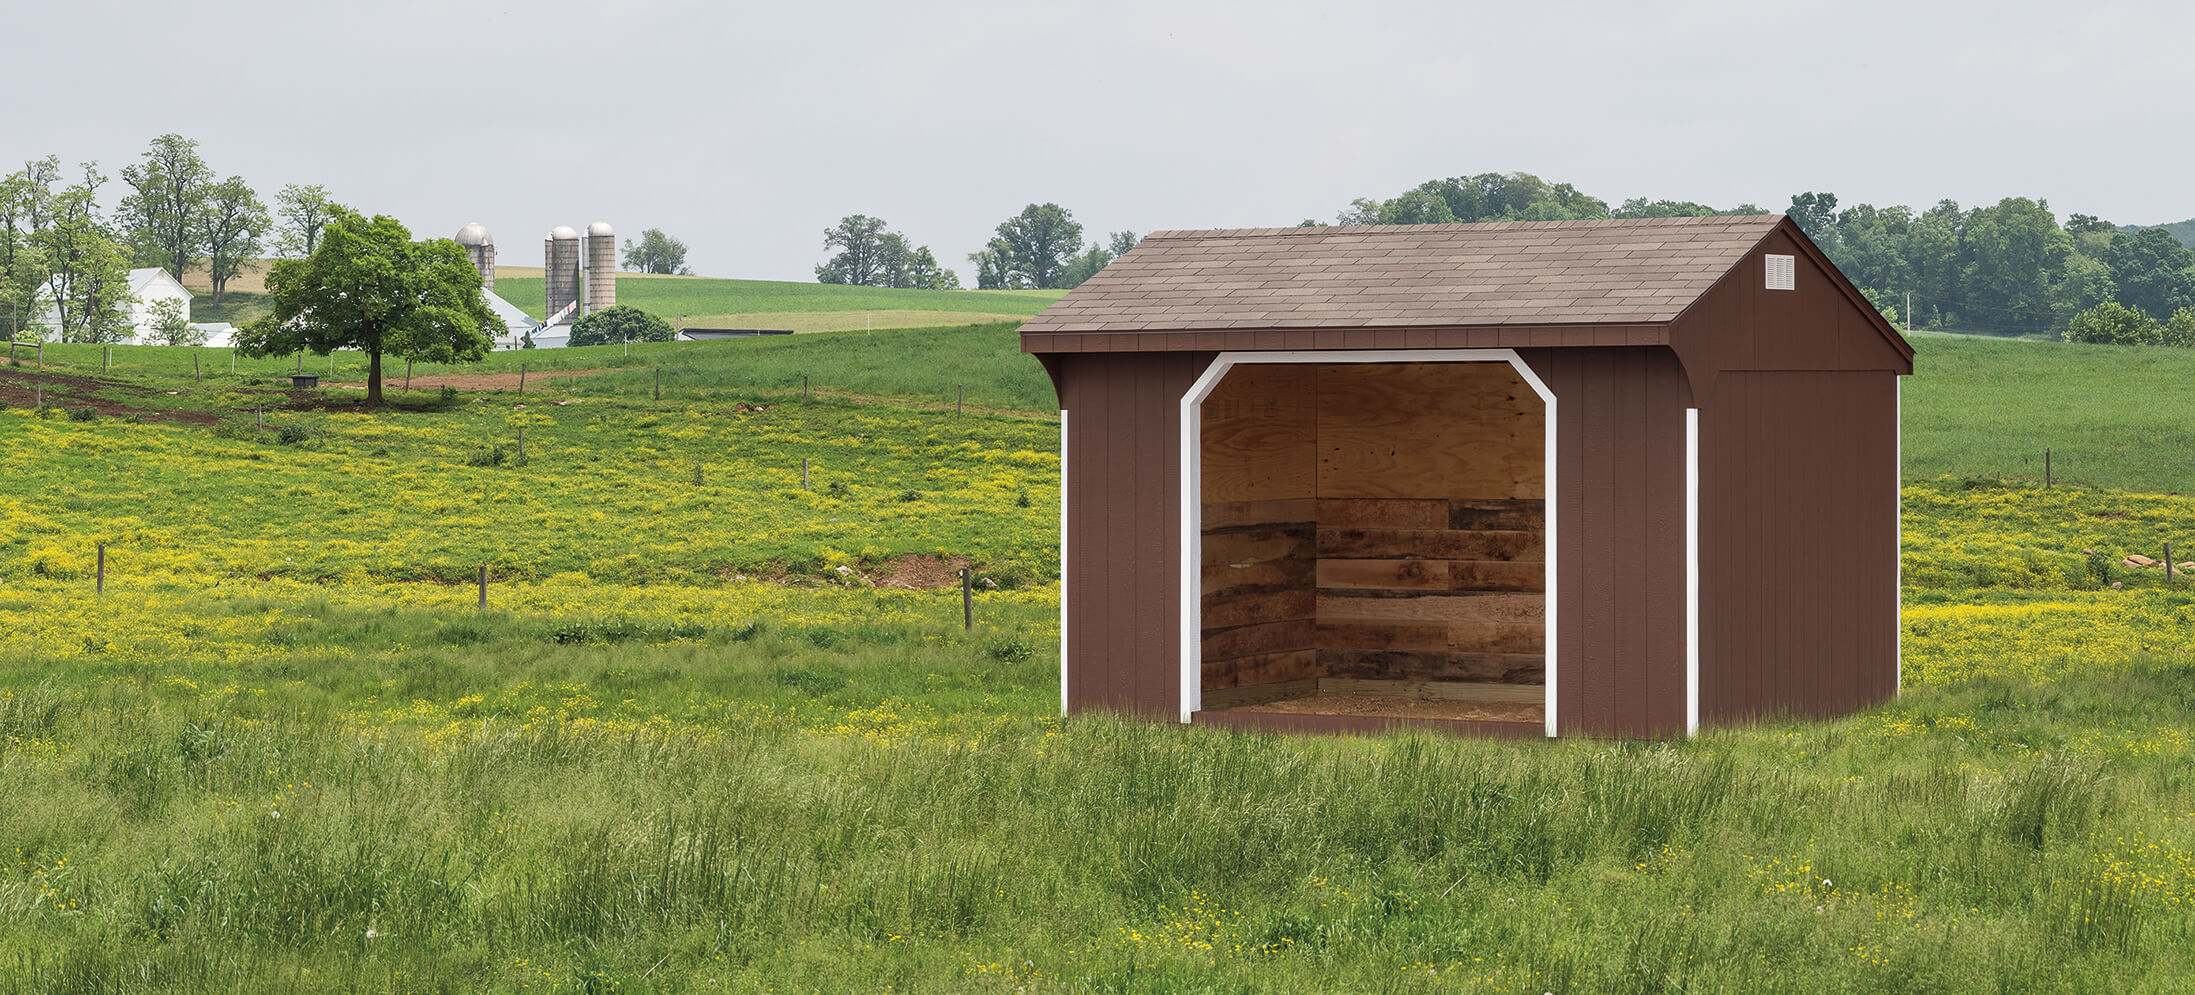 Run-In Horse Shed.